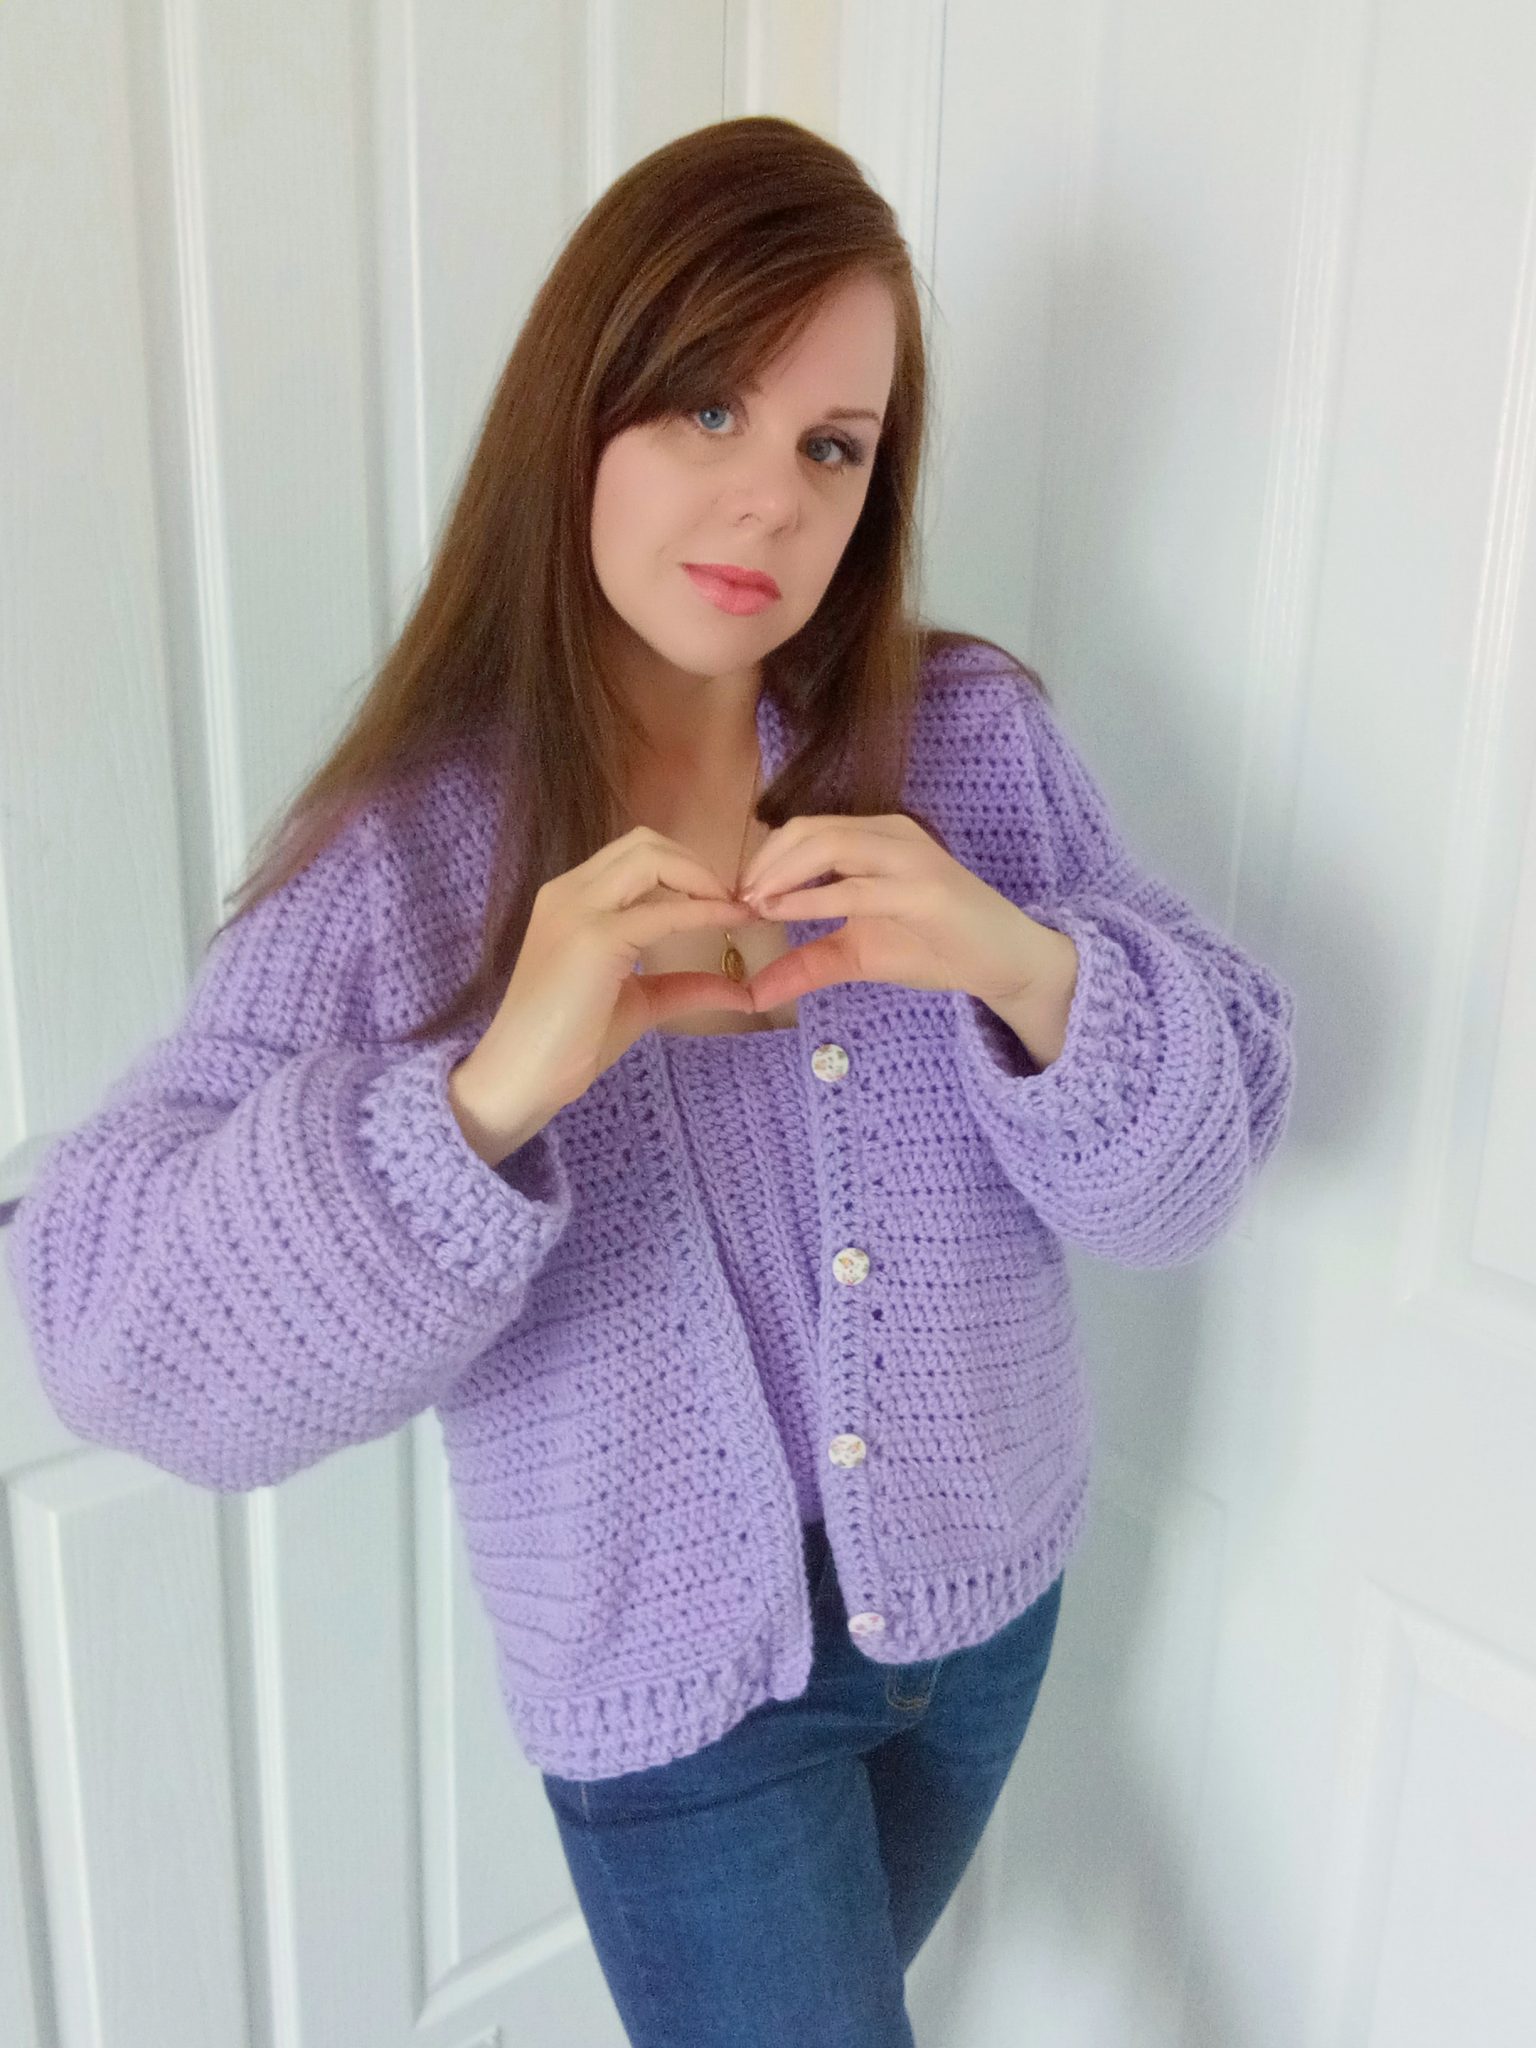 Crochet The Sweet Lilac Cardigan by Selina Veronique